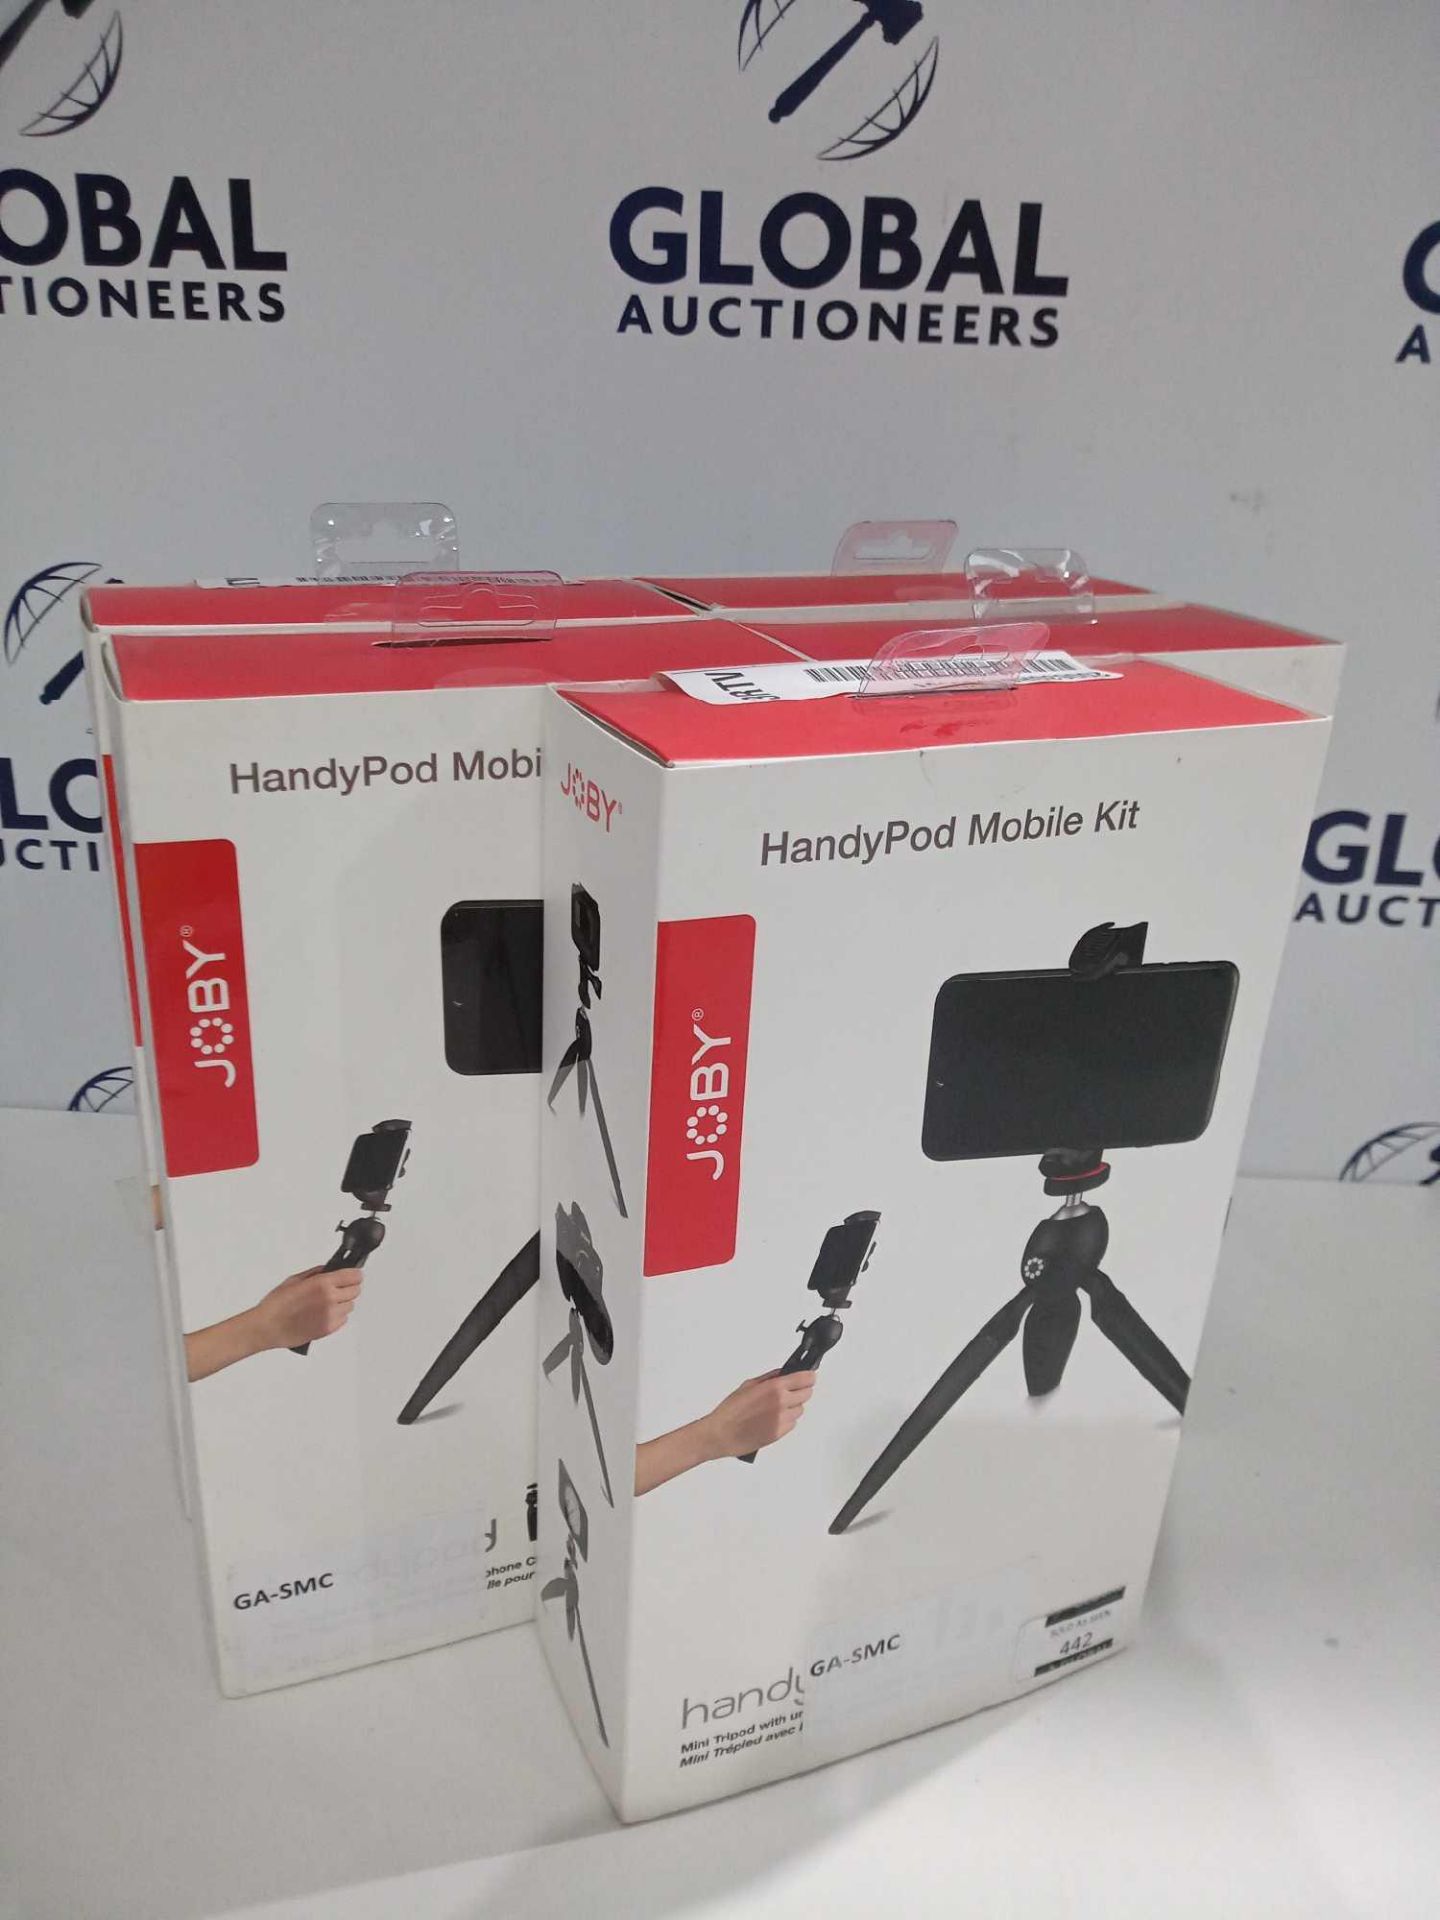 Rrp £150 Lots To Contain At 5 At Boxed Joby Handypod Mobile Kit Mini Tripod With Universal Smartphon - Image 2 of 2